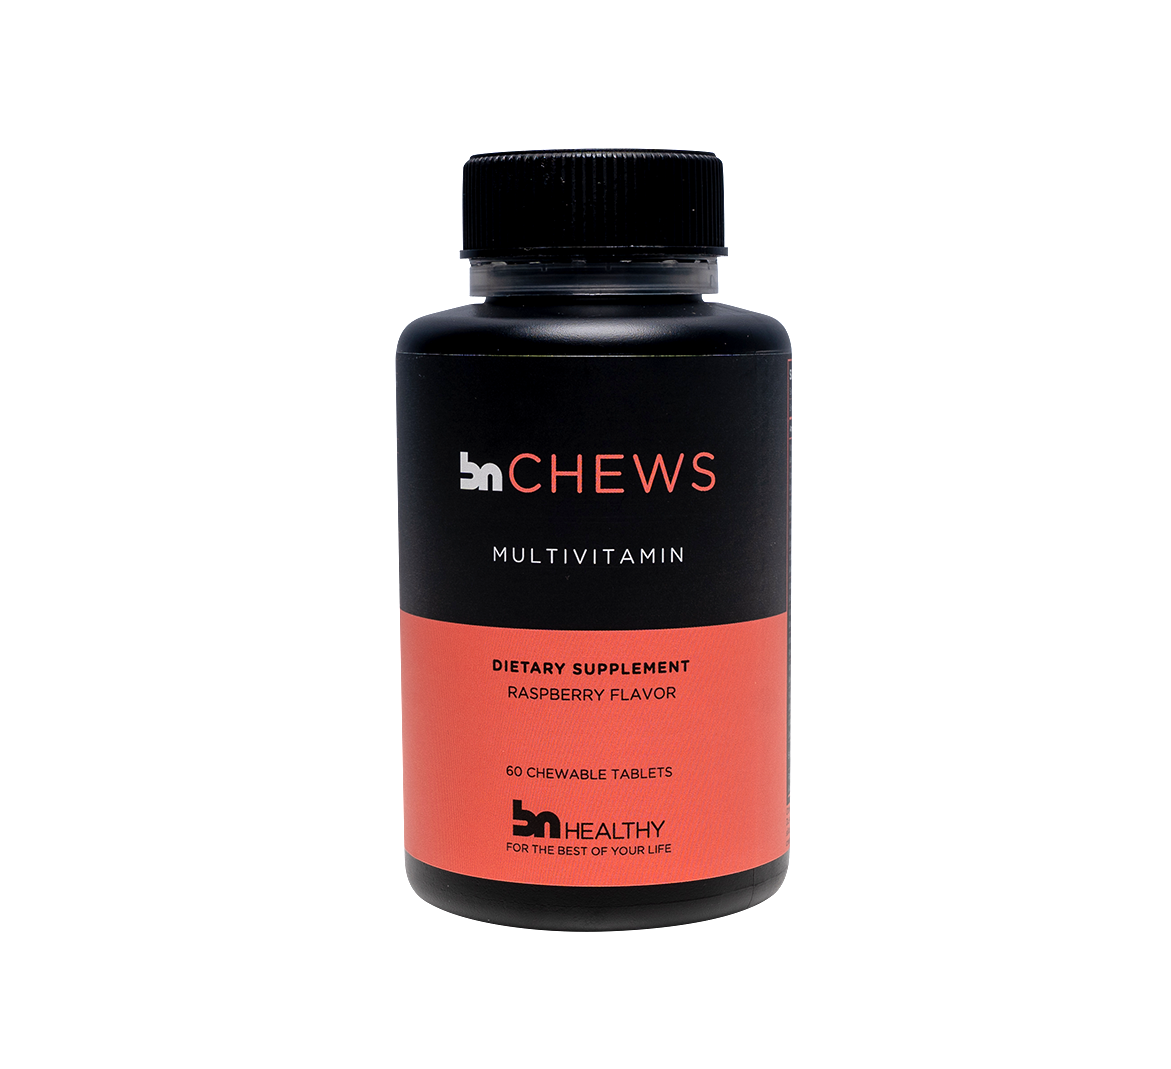 BN Chews -Chewable Bariatric Multivitamins & BN Cal - 3 Month Subscription - Save 25%